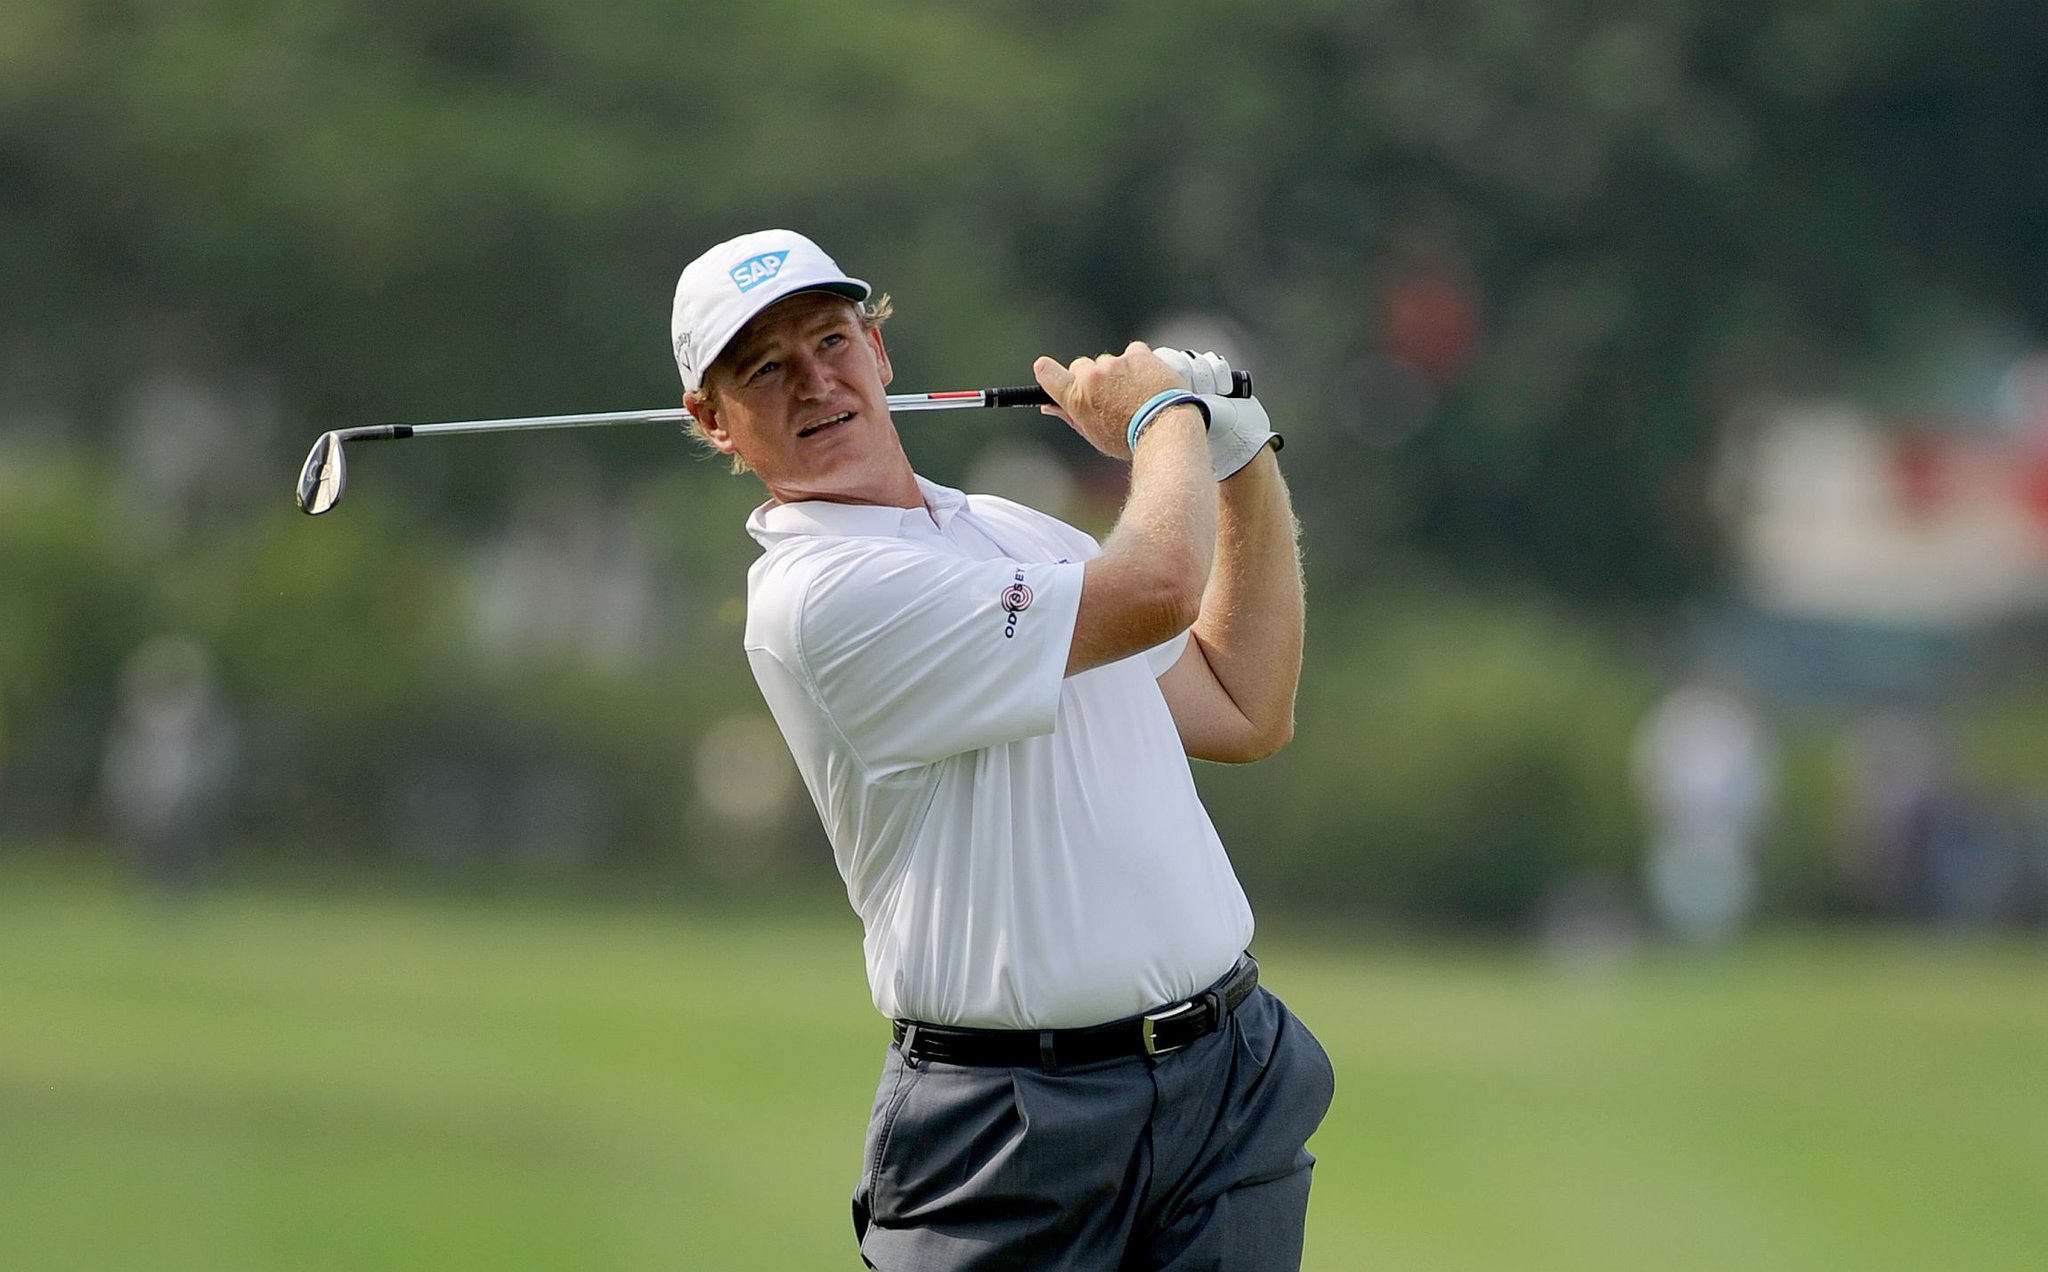 Happy Birthday to Ernie Els who turns 48 today! 